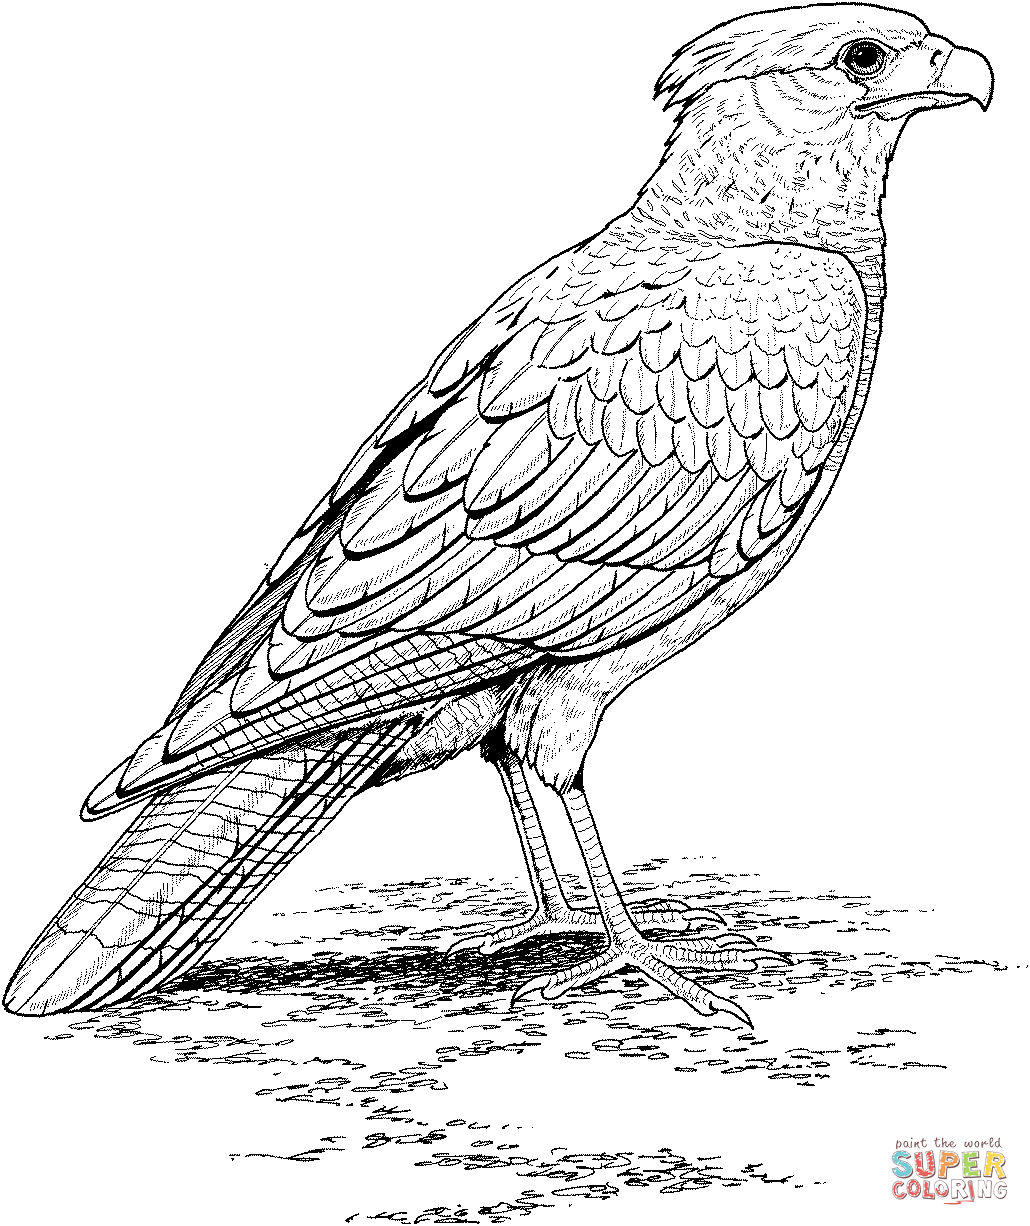 Peregrine Falcon coloring #7, Download drawings